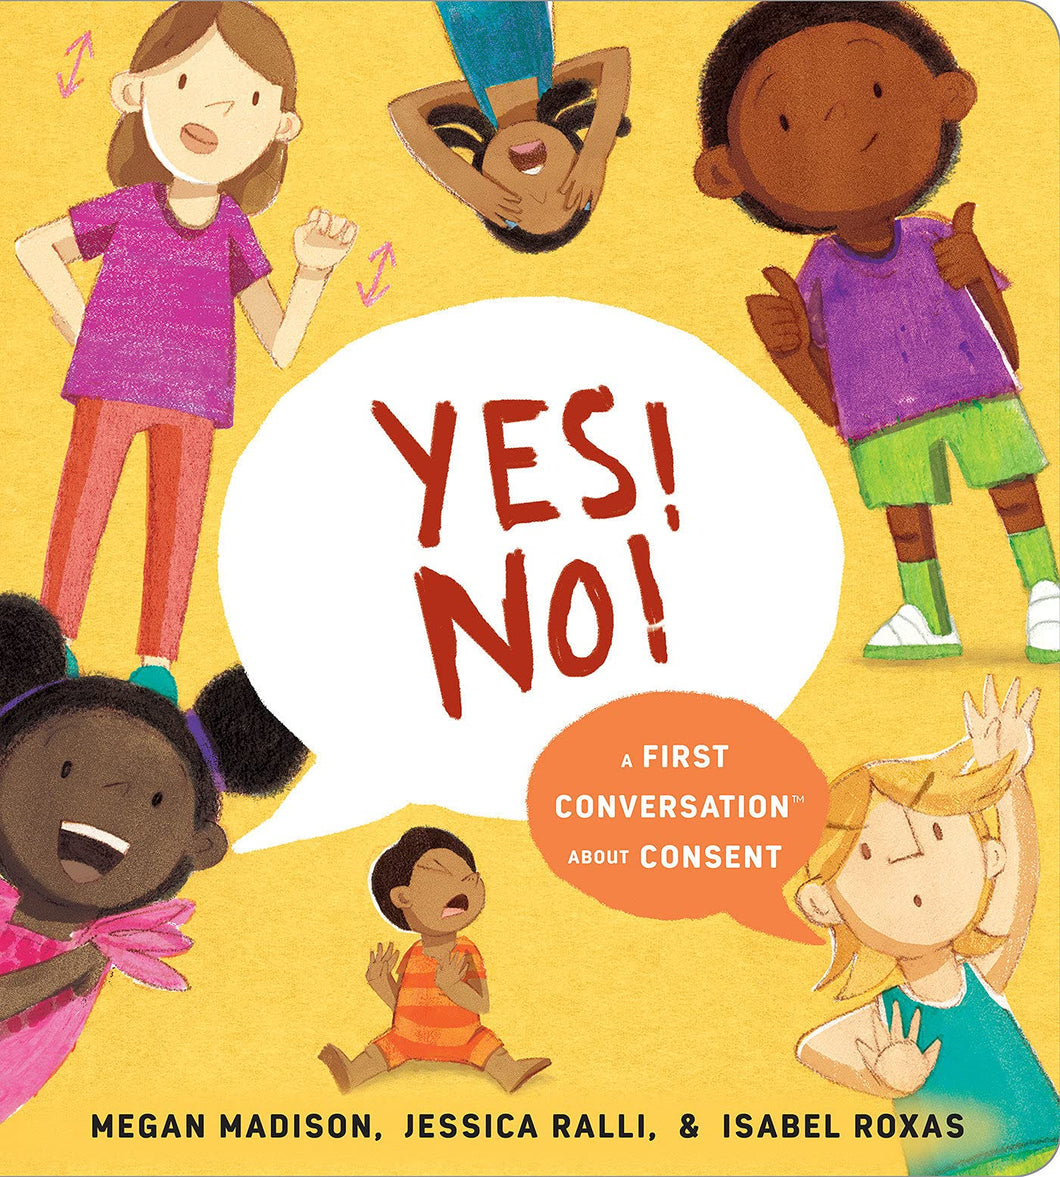 Yes! No!: A First Conversation About Consent Board Book [Megan Madison & Jessica Ralli]